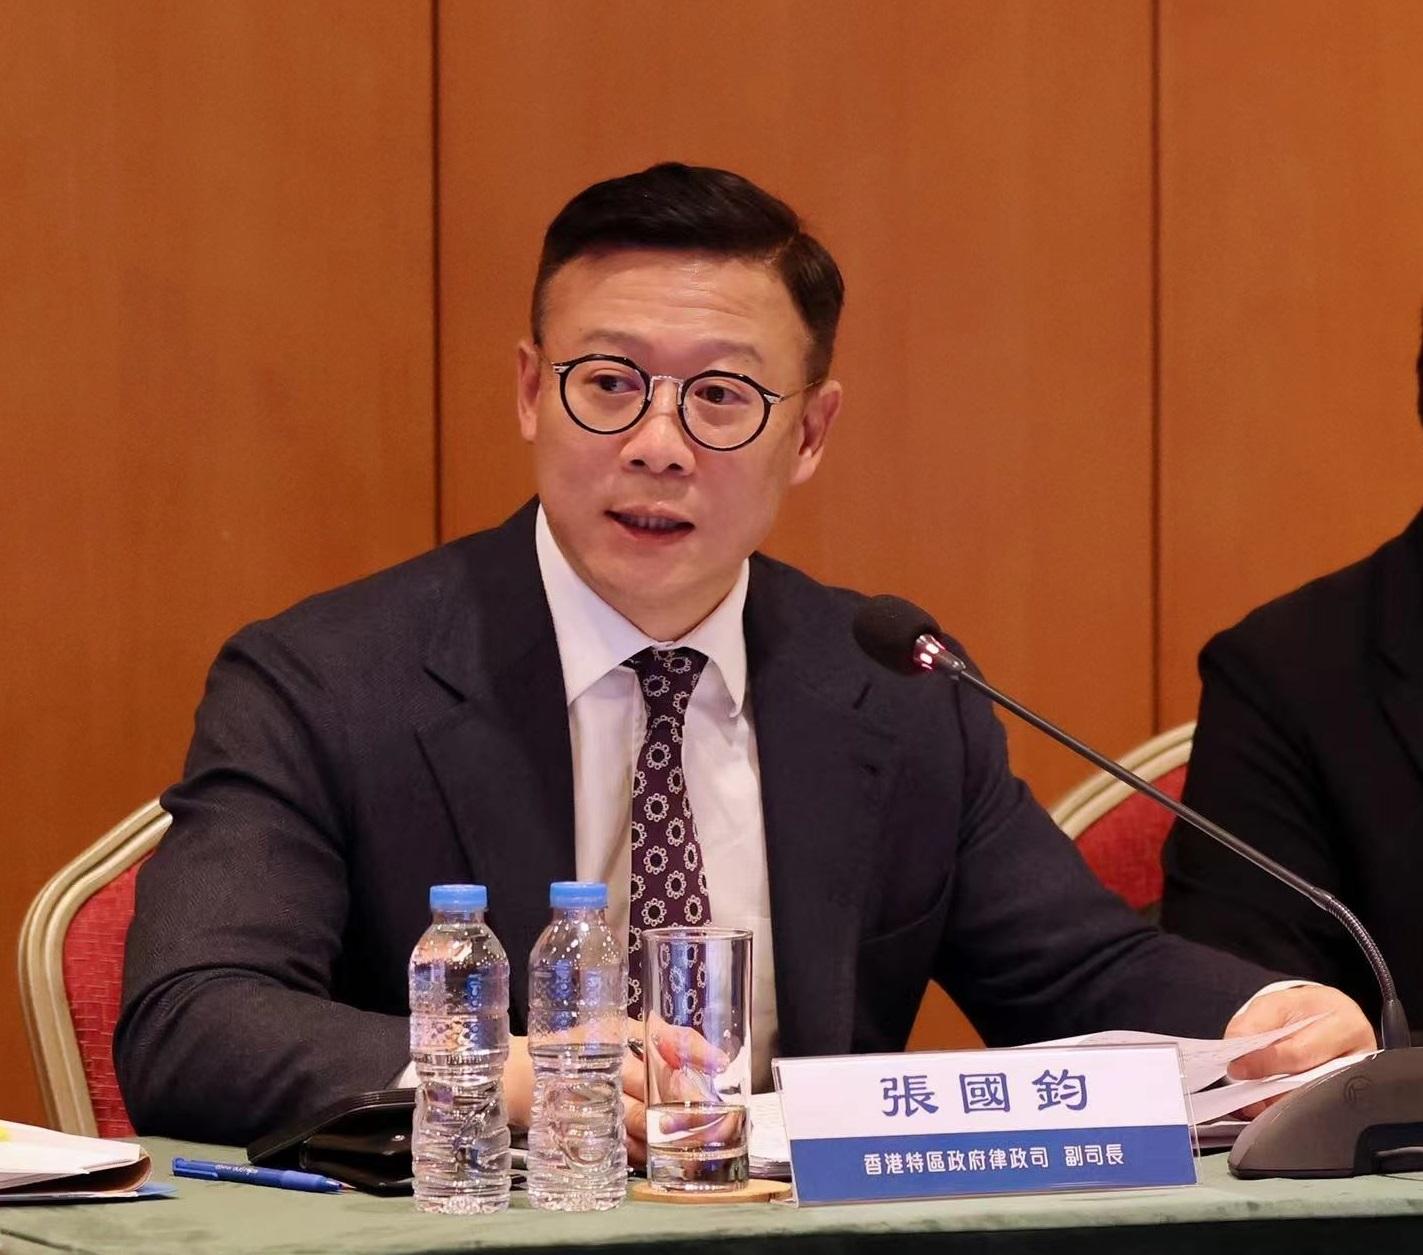 FSTB, Department of Commerce of Guangdong Province and Zhuhai